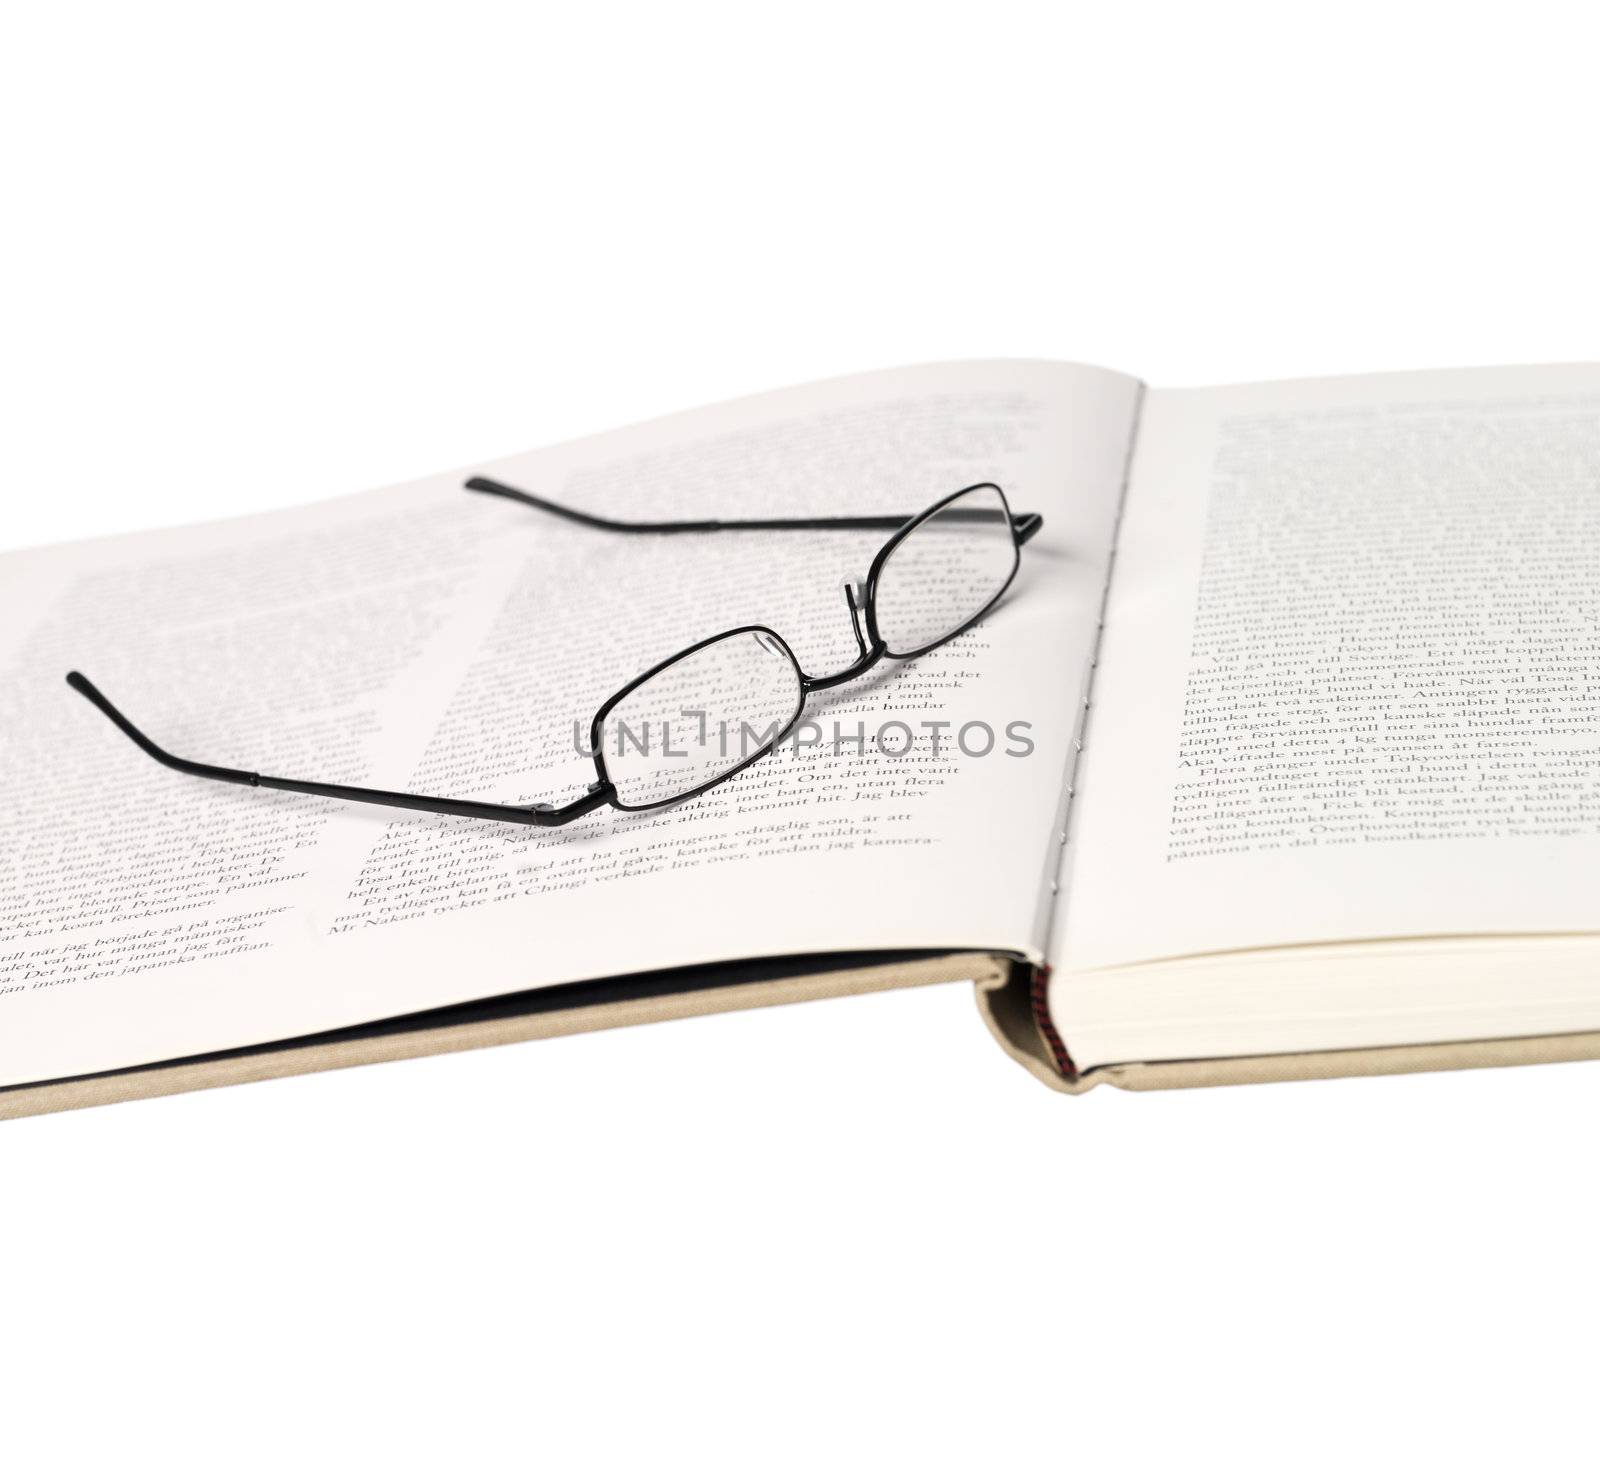 Glasses in a spread book by gemenacom